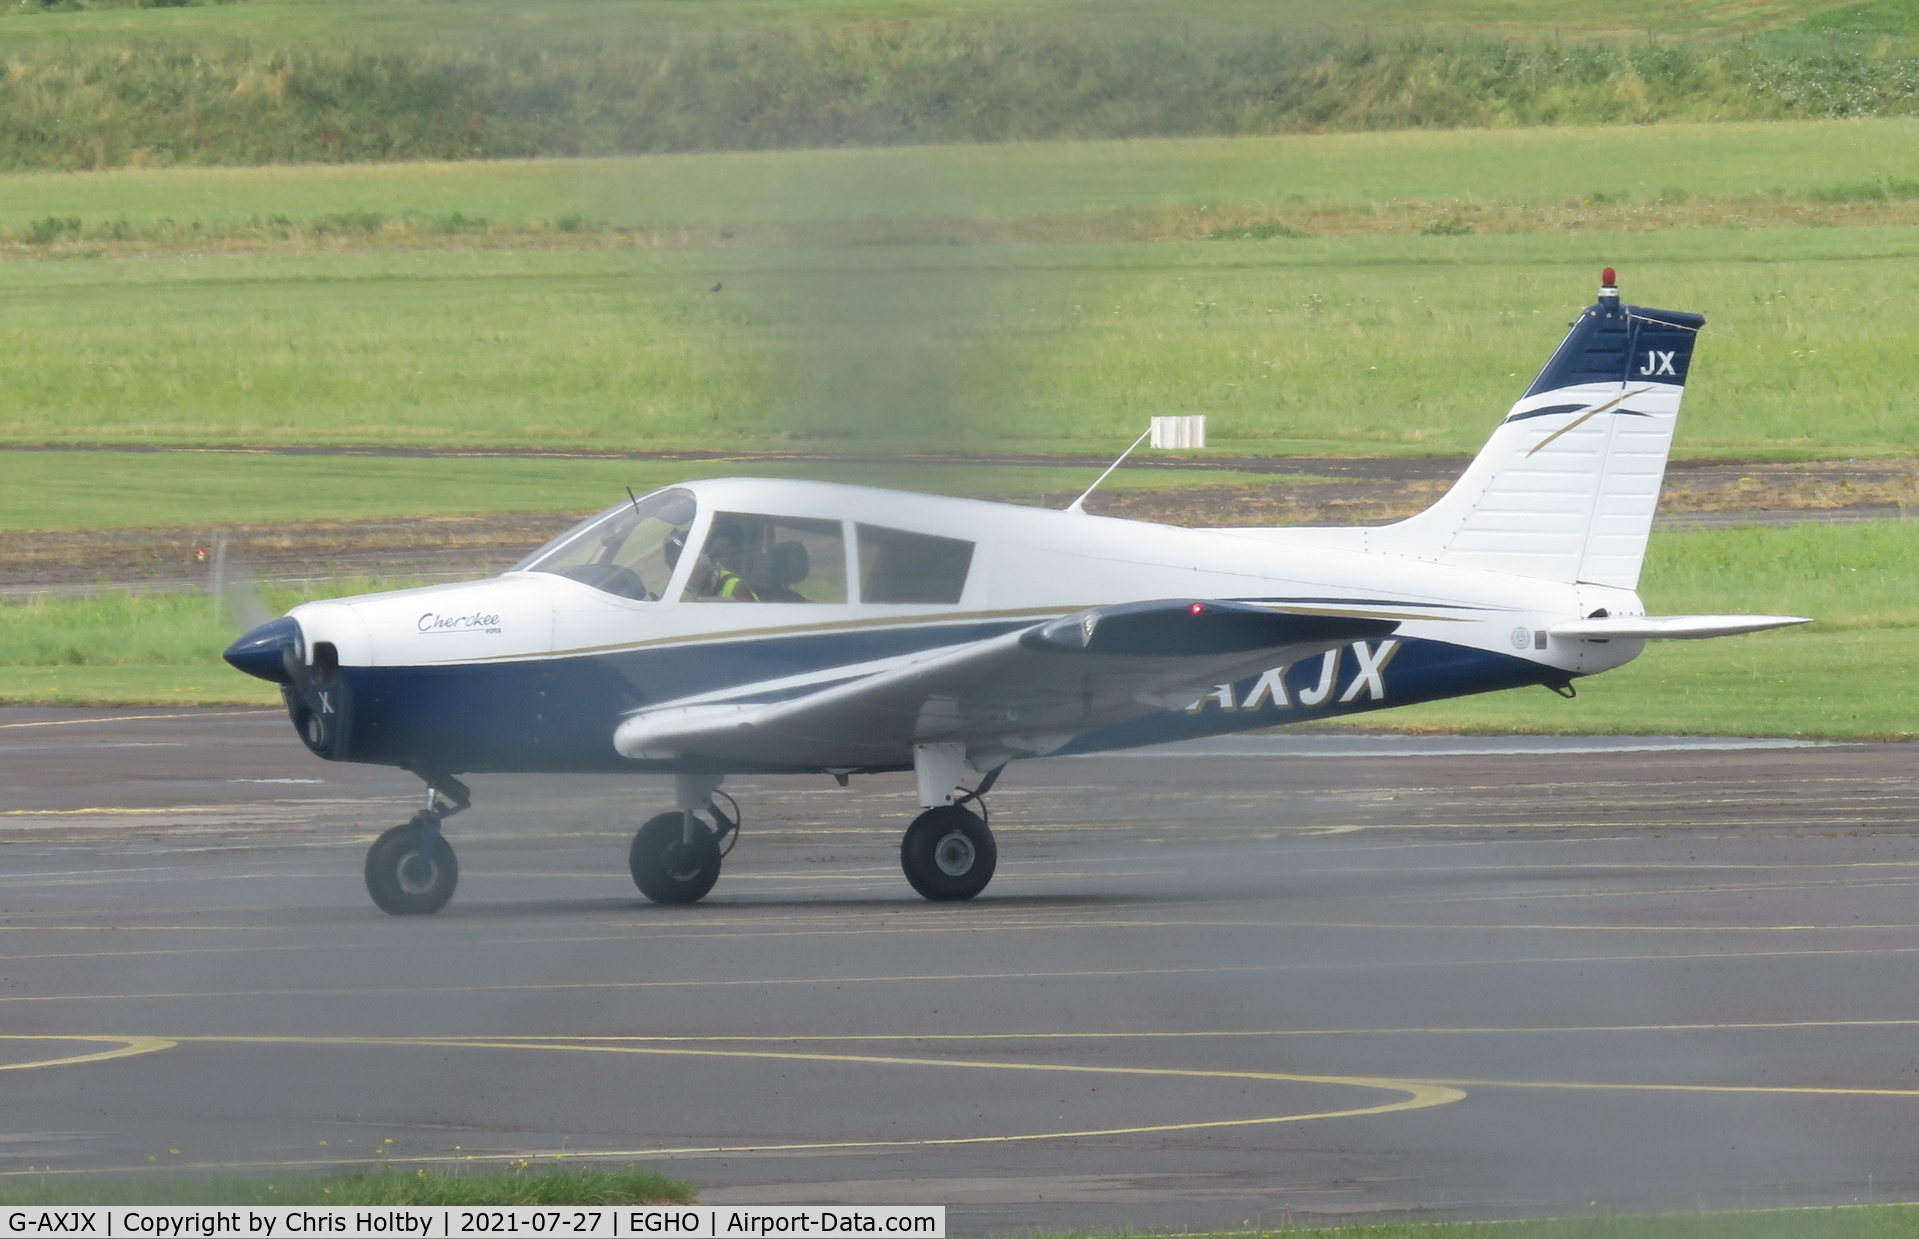 G-AXJX, 1969 Piper PA-28-140 Cherokee C/N 28-25990, At Thruxton Airfield just landed